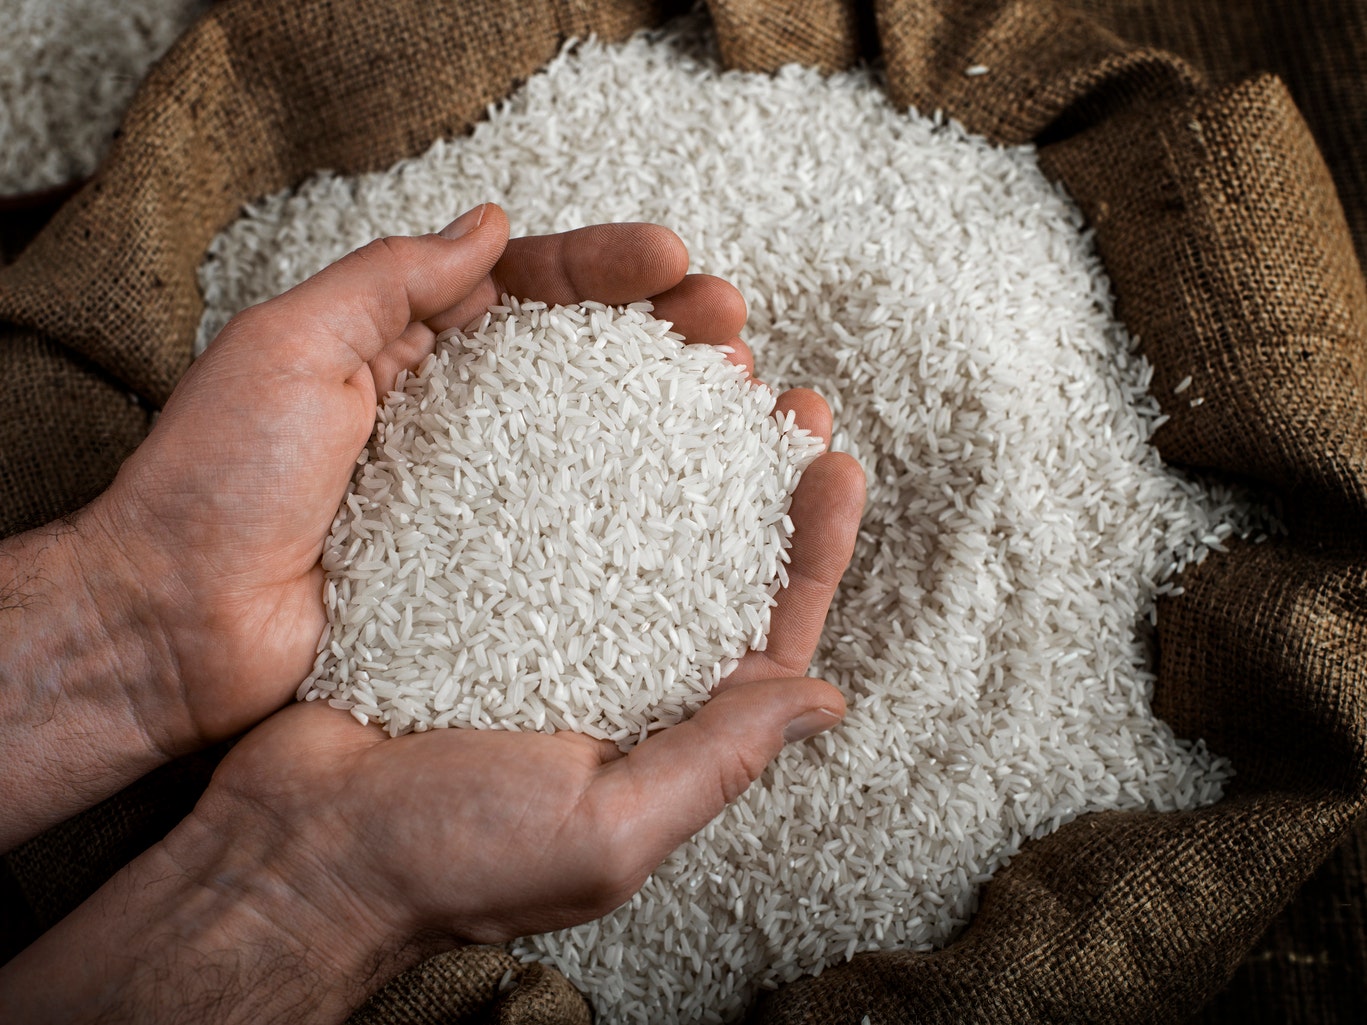 India fuels food inflation fears with latest rice export ban | Seeking Alpha